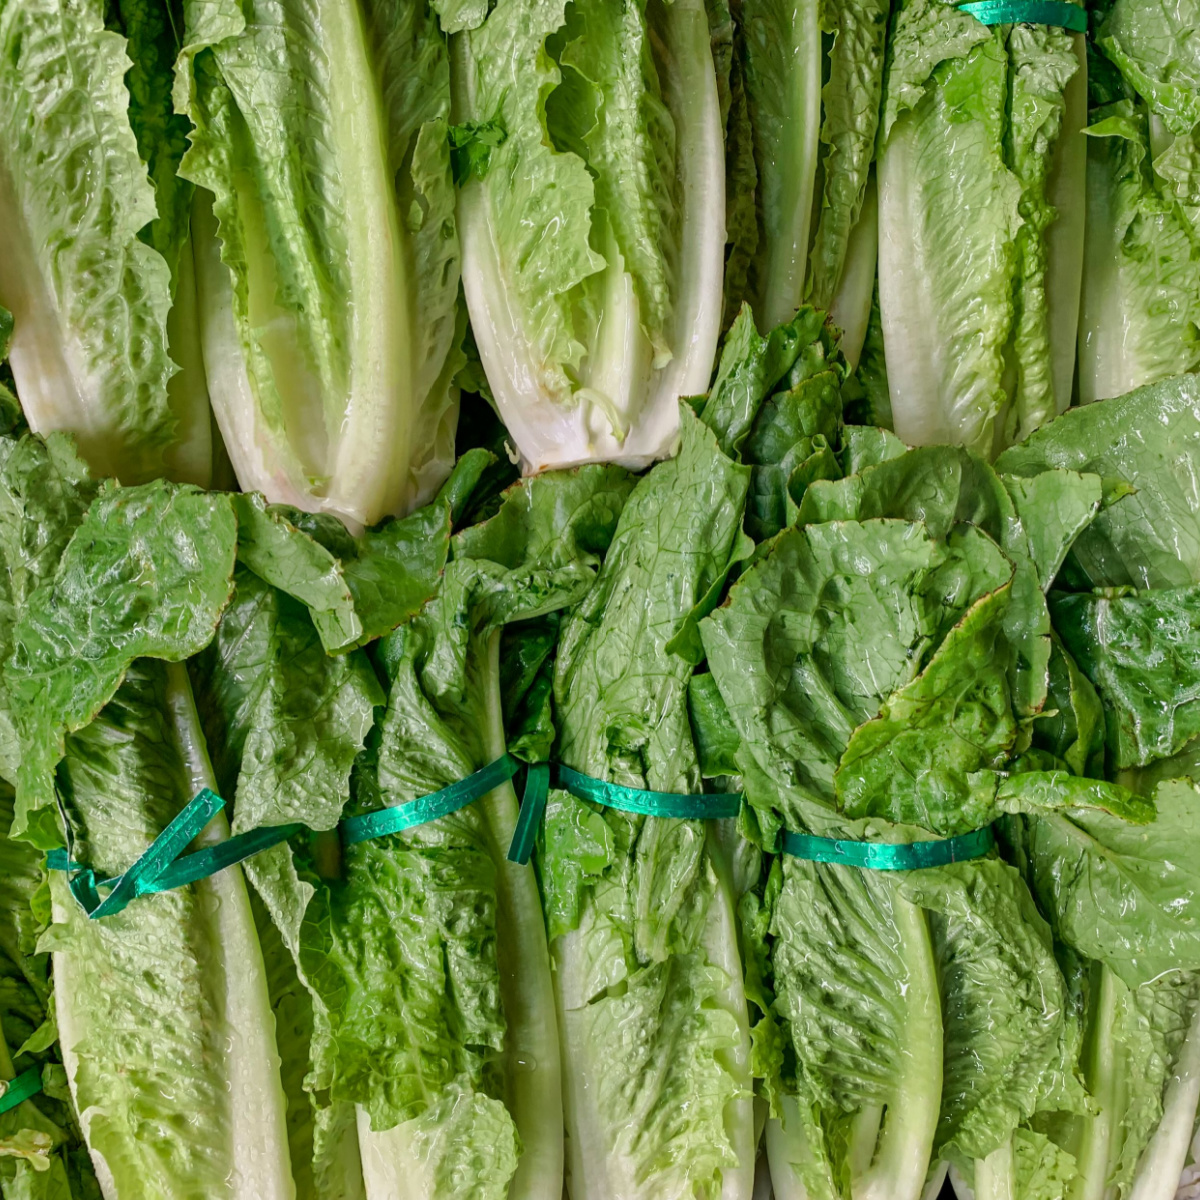 close-up photo of lettuce romaine wrapped grocery store